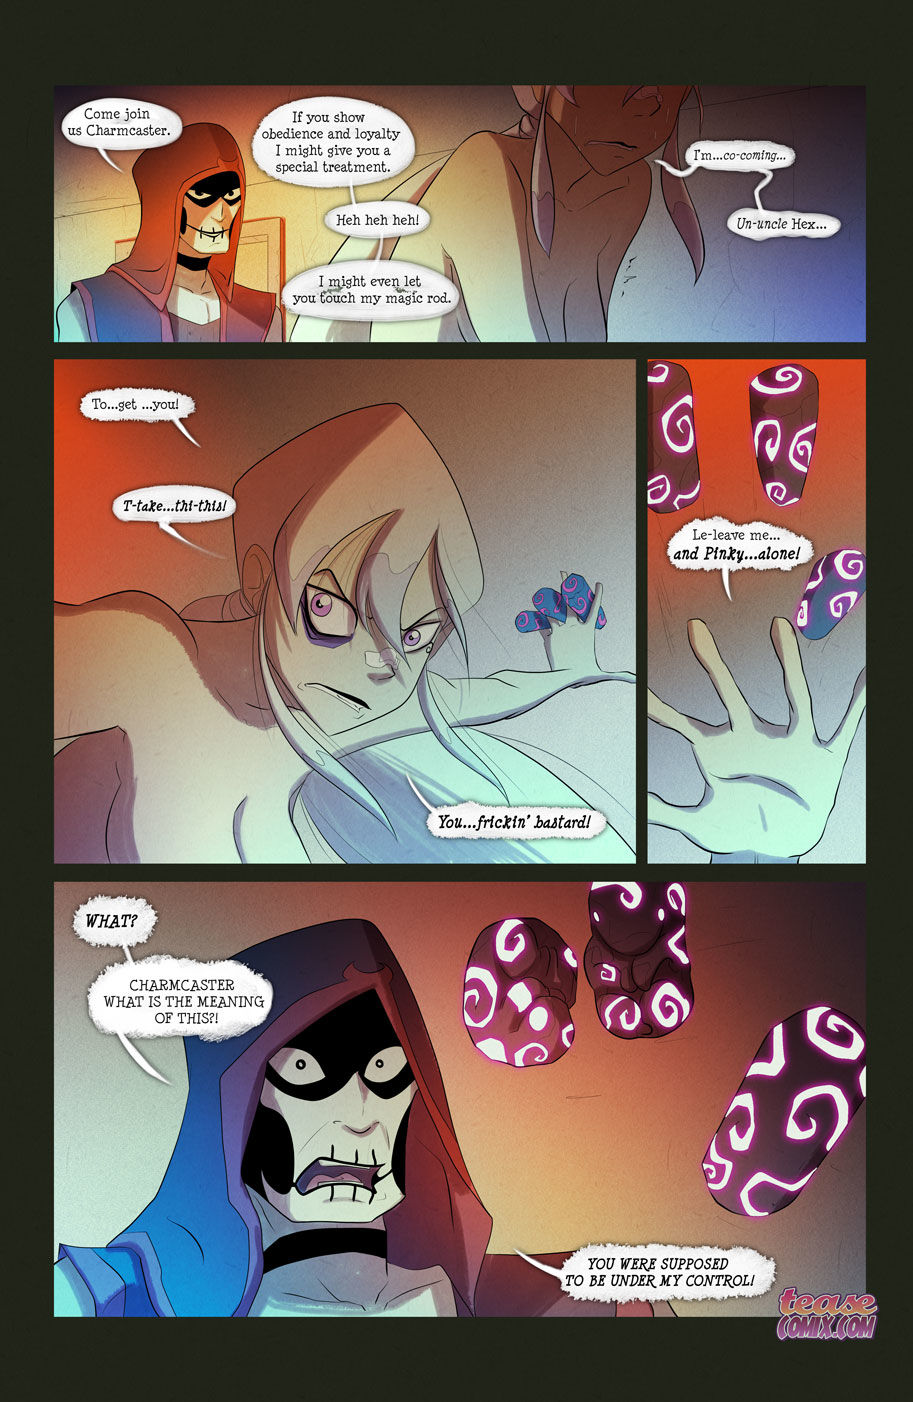 Fixxxer - The witch with no name, Ben 10 page 44